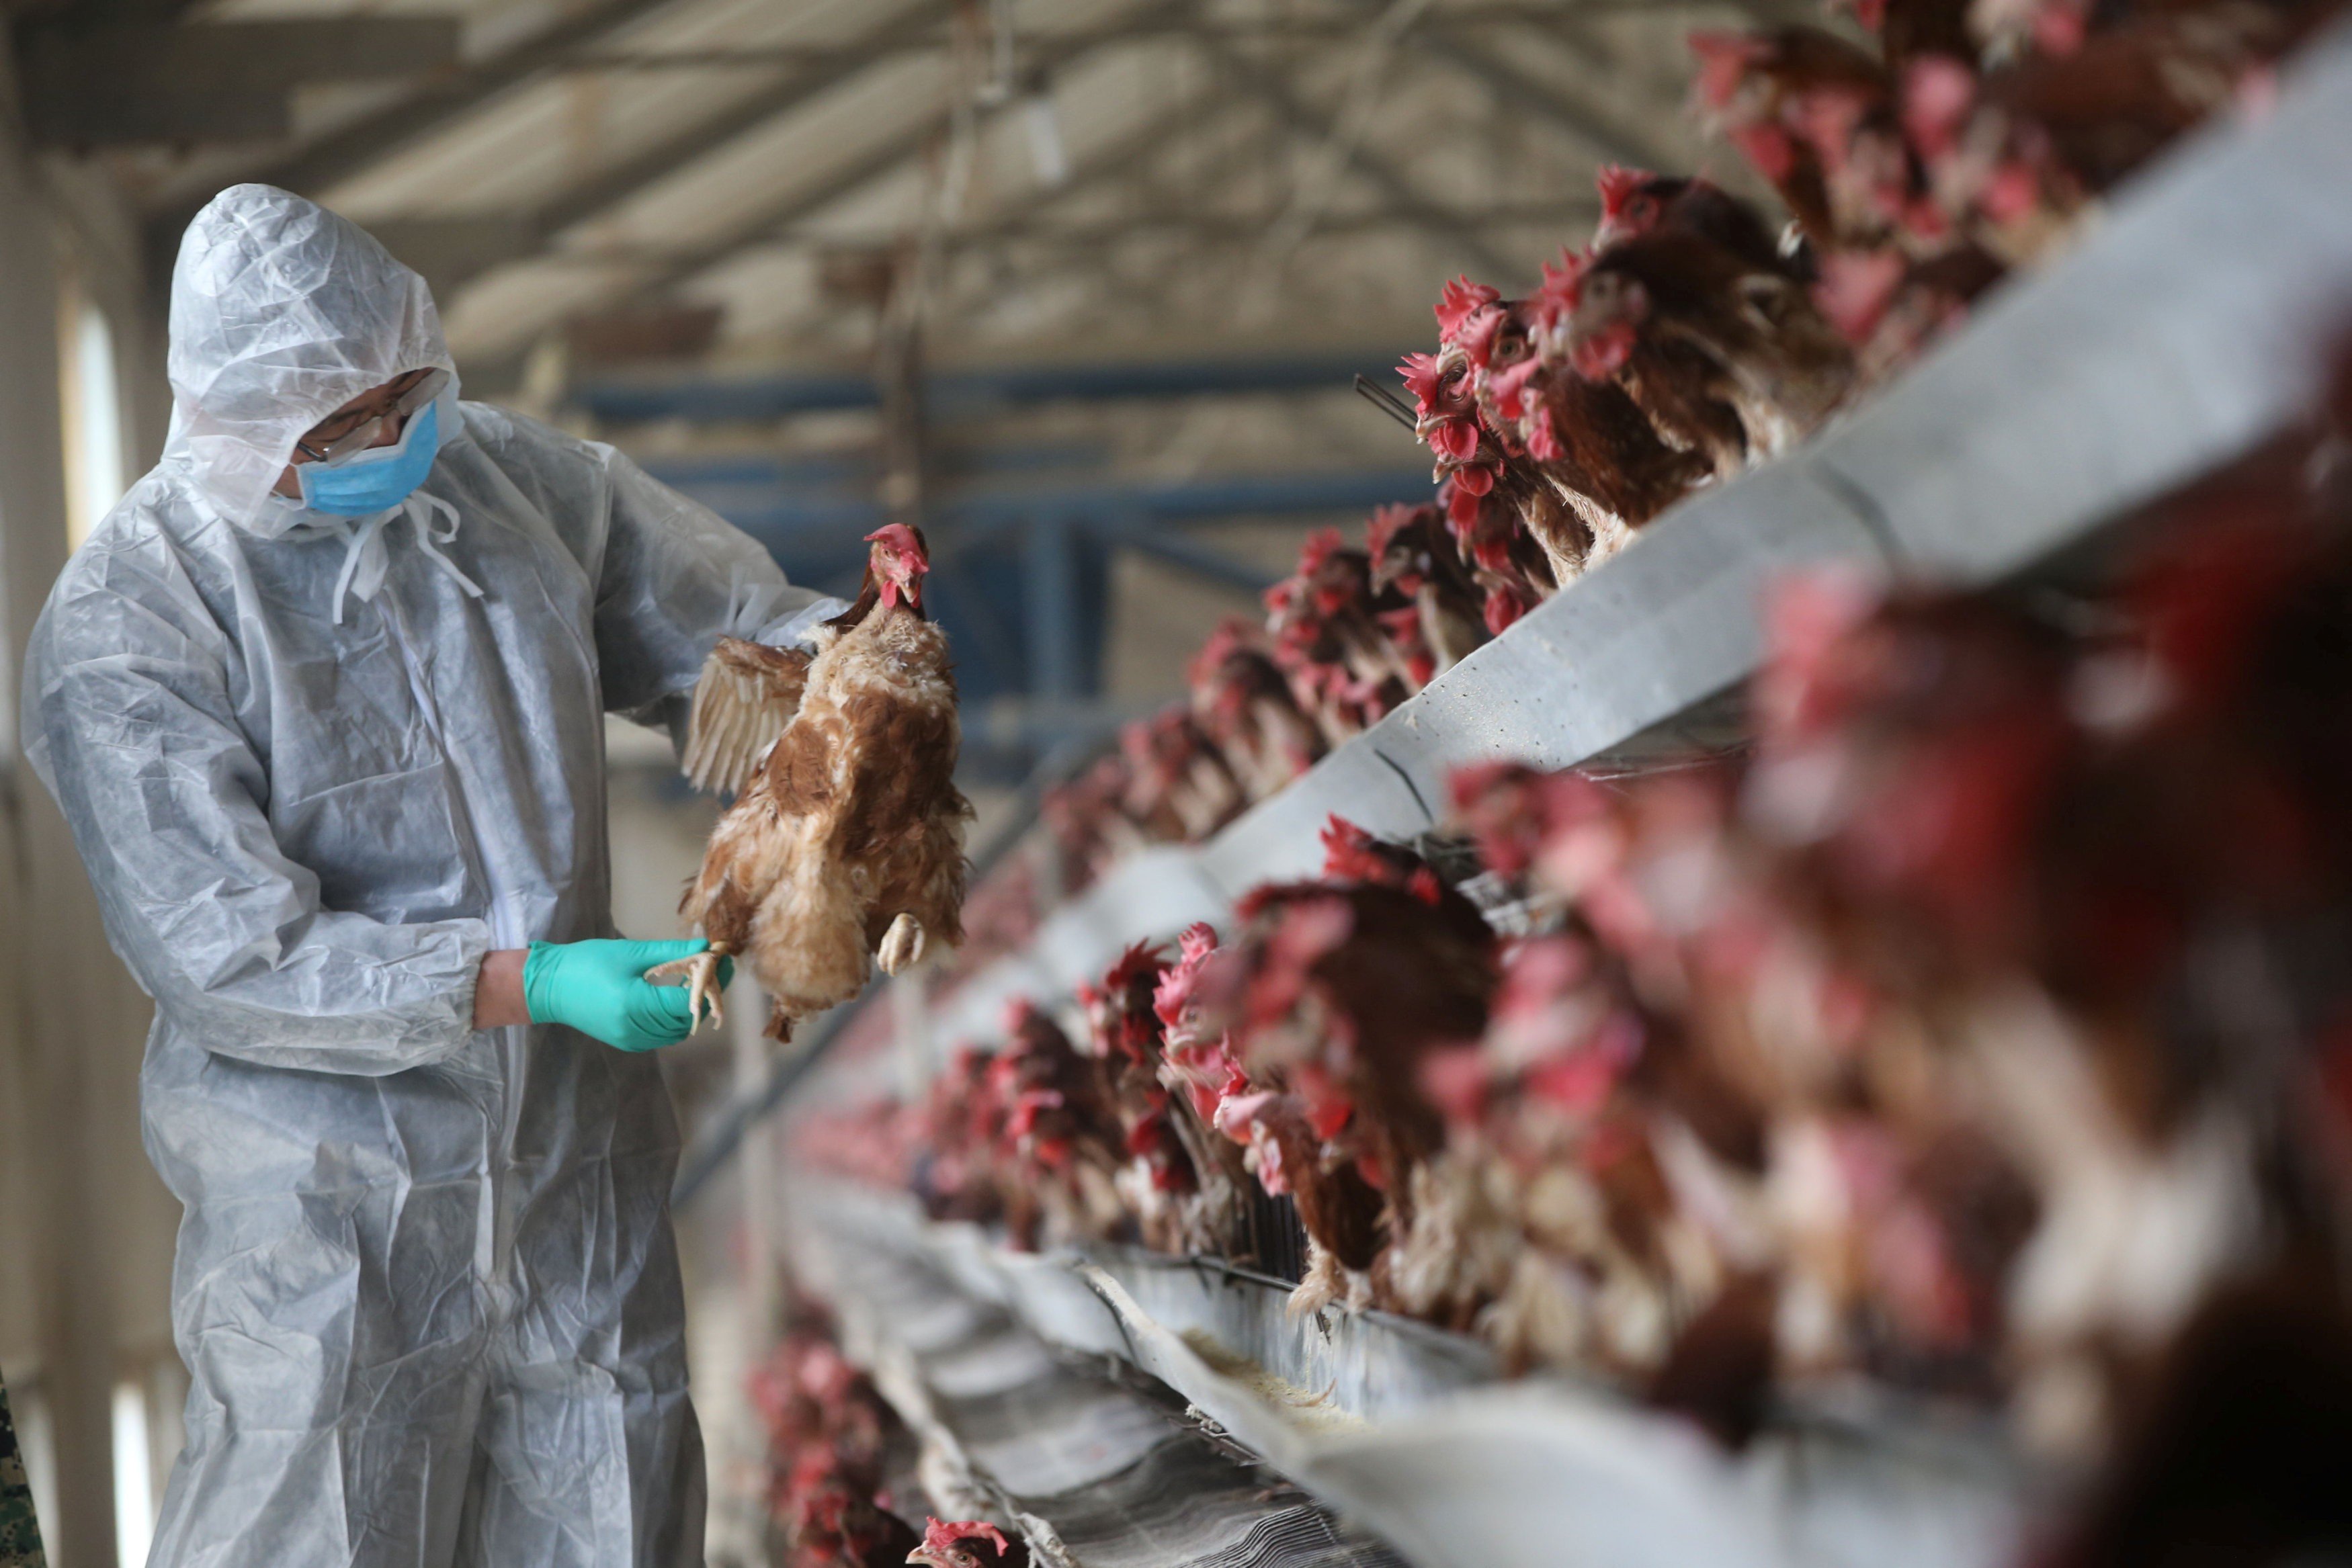 H5N1 bird flu has been reported in chickens in two Chinese provinces this month. Photo: Reuters